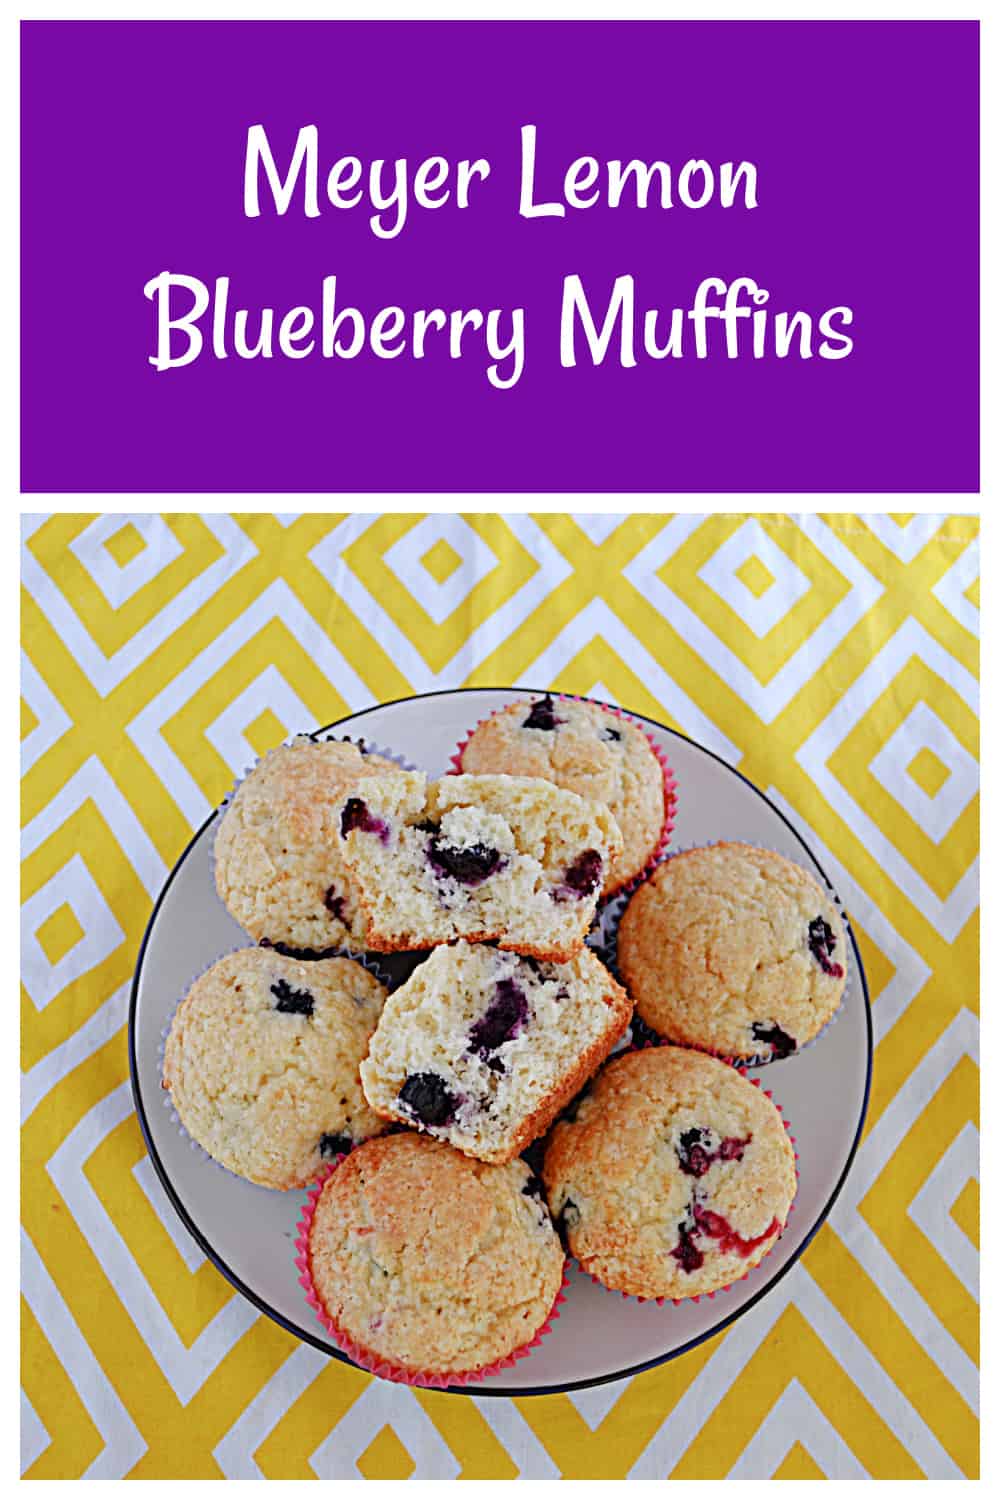 Pin Image:   Text title, a plate of lemon blueberry muffins with a muffin split in half in the middle.